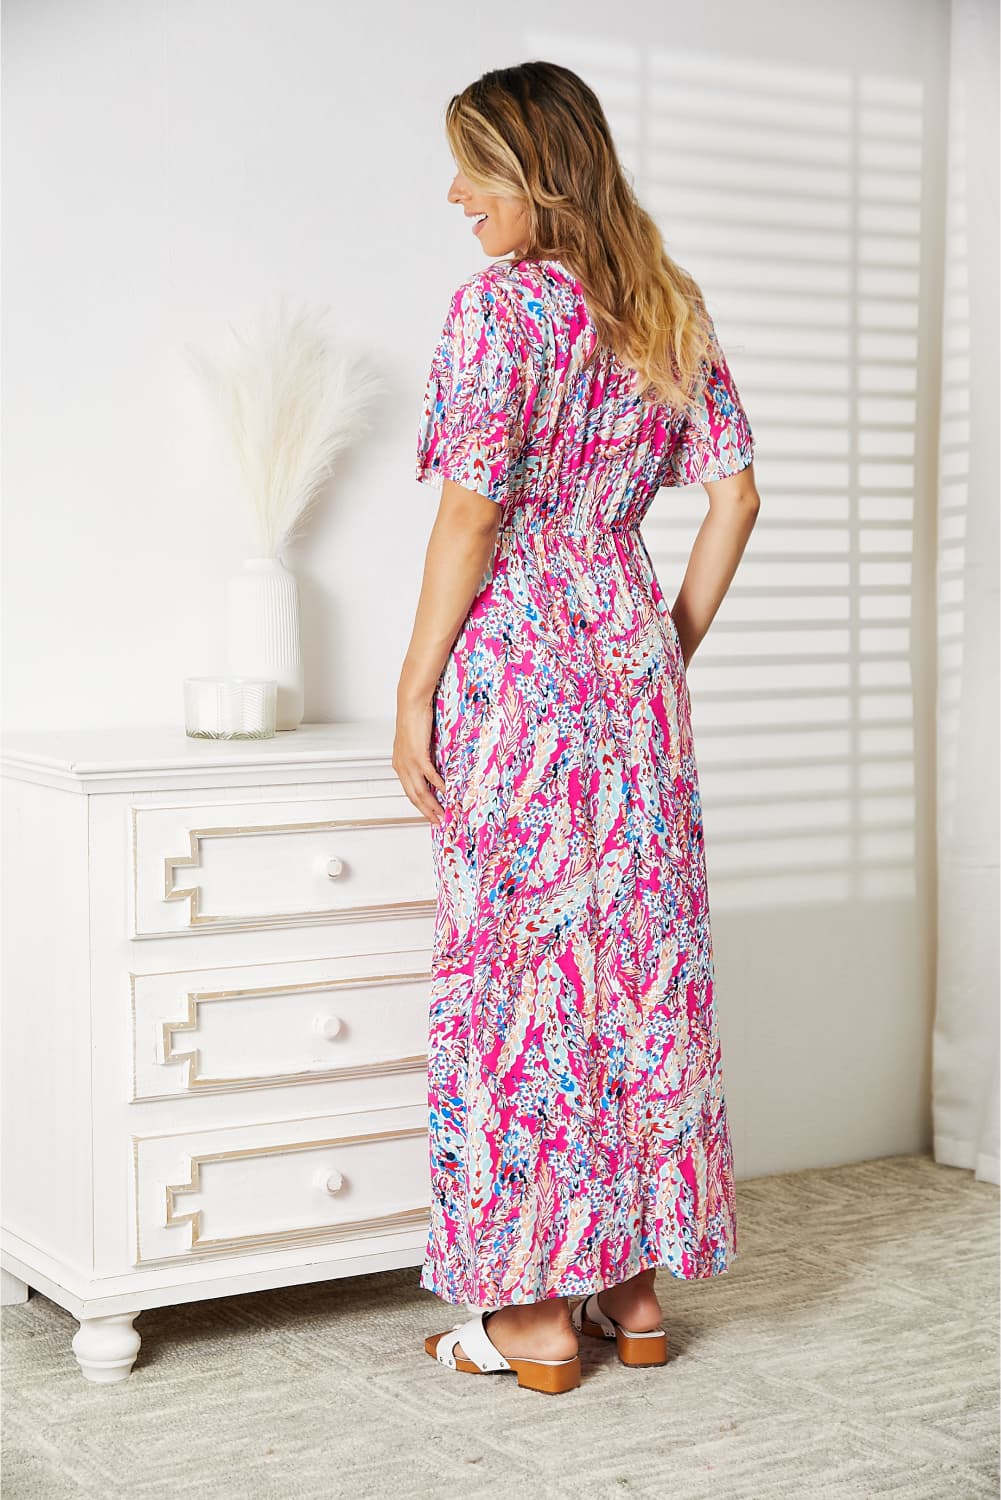 Double Take Hot Pink Multicolored V-Neck Maxi Dress